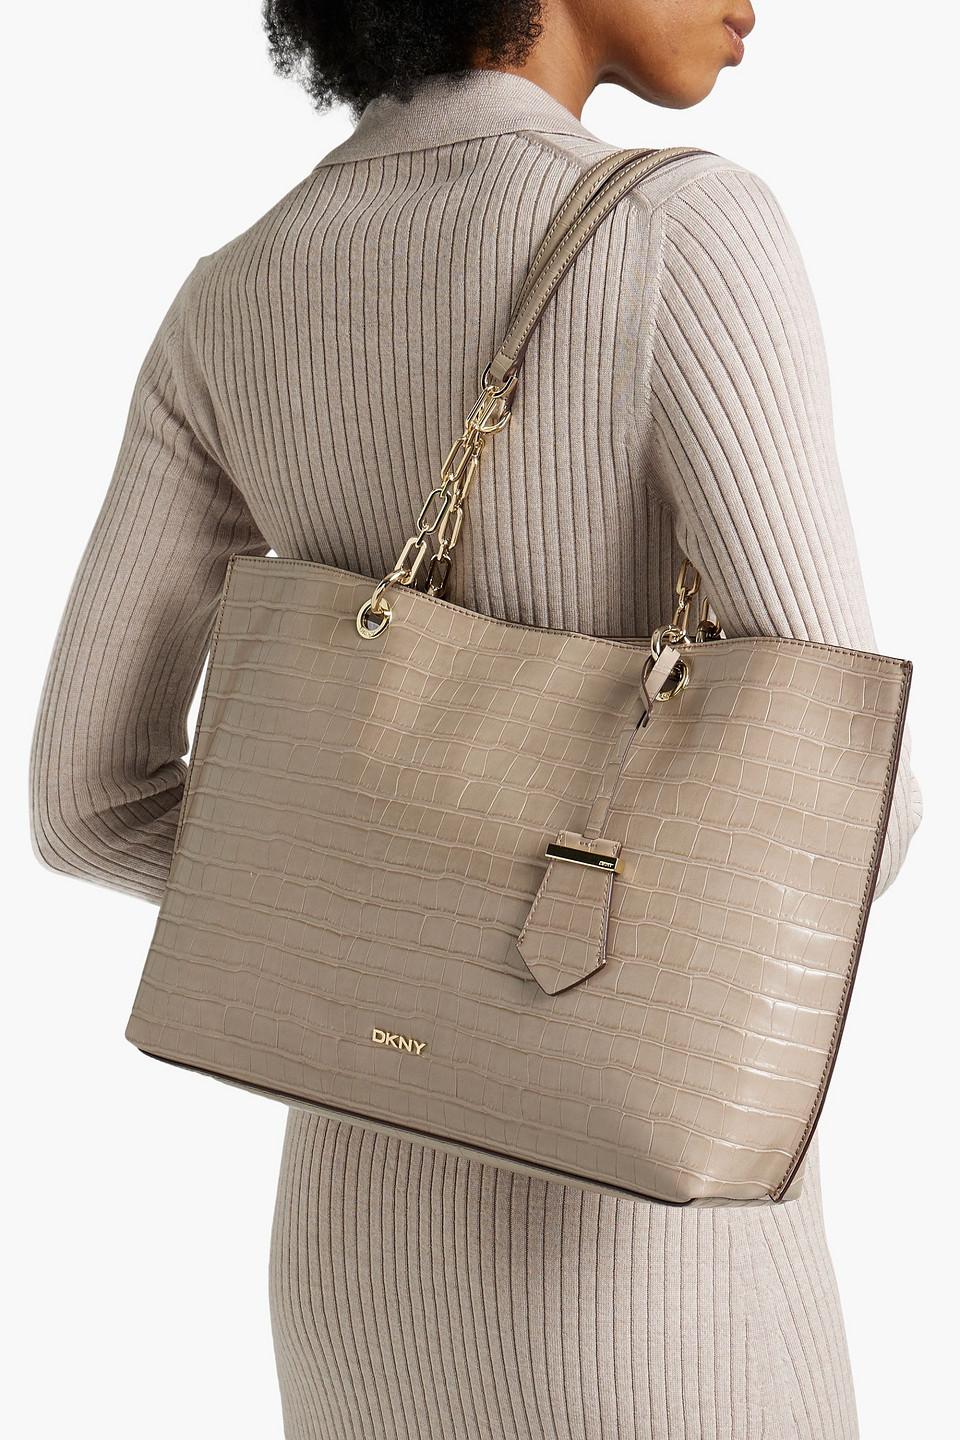 DKNY Claire Faux Croc-effect Leather Tote in Natural | Lyst